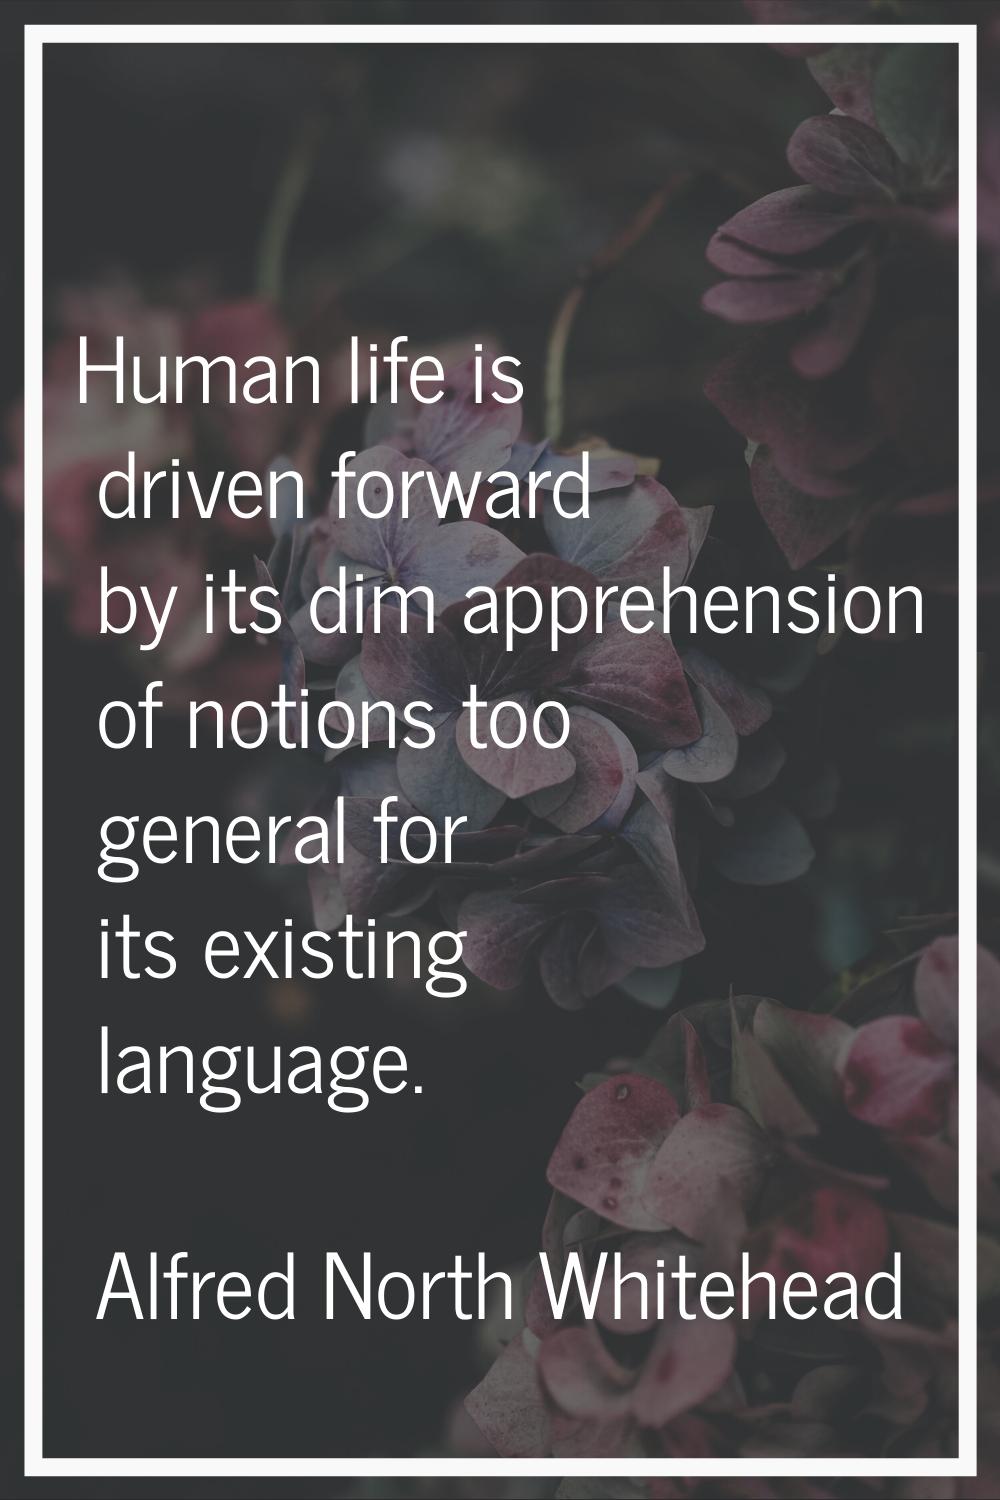 Human life is driven forward by its dim apprehension of notions too general for its existing langua